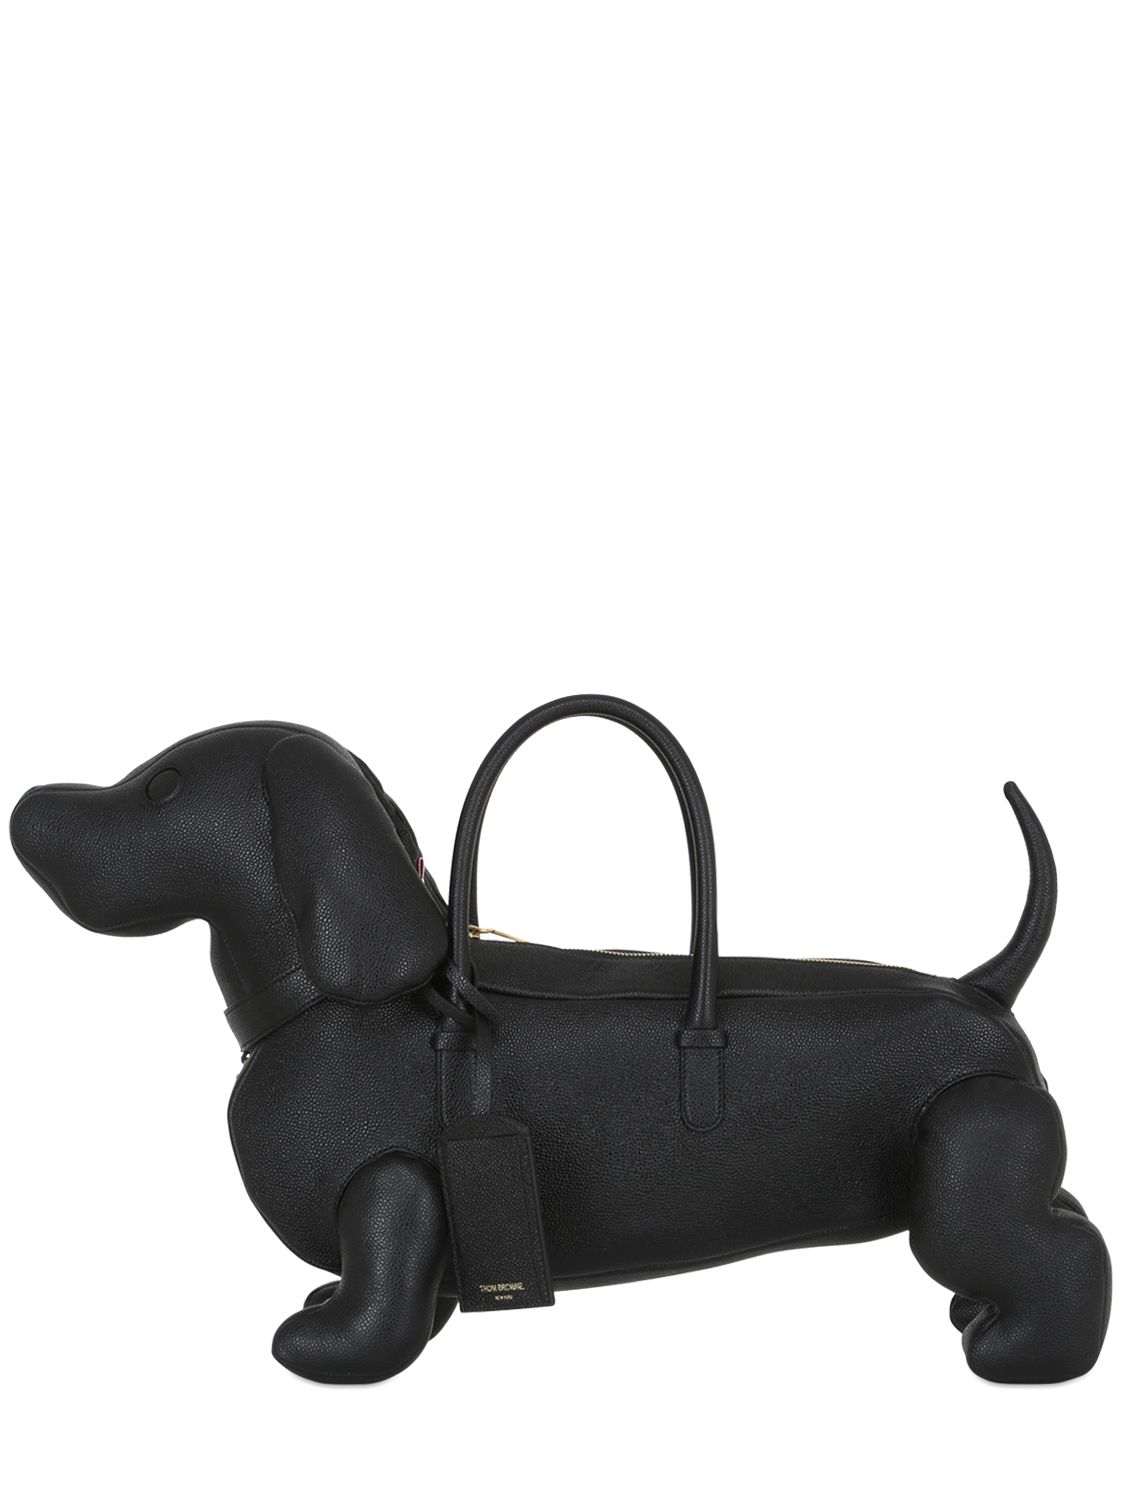 Thom browne Dog-shaped Pebbled Leather Bag in Black | Lyst